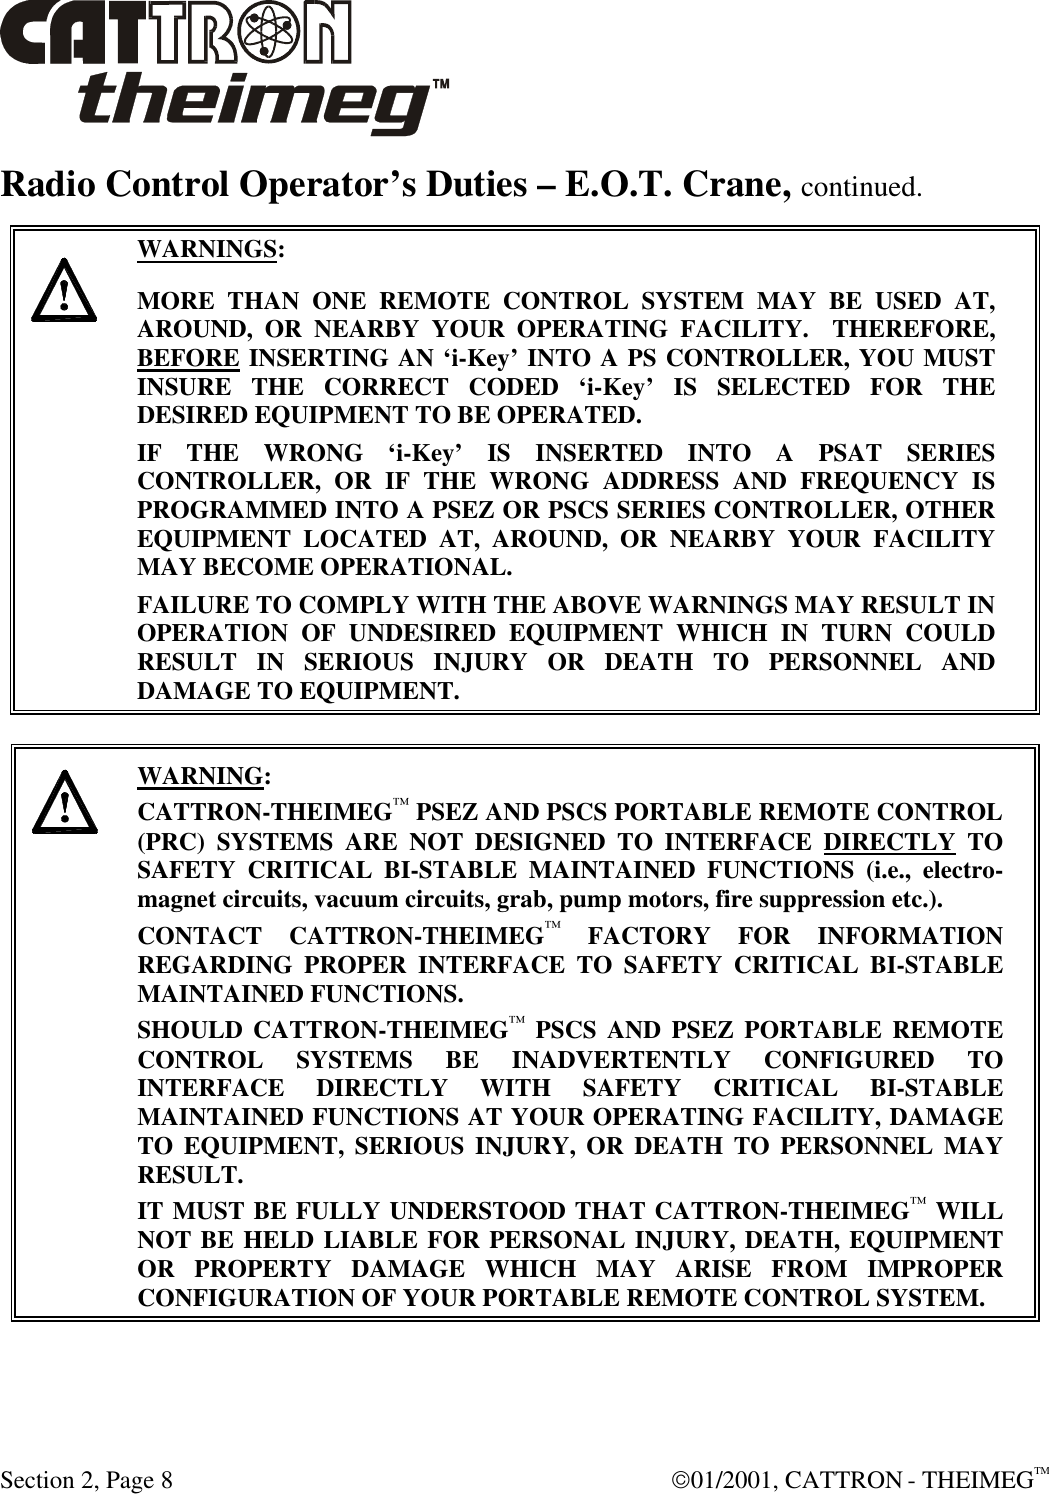  Section 2, Page 8  01/2001, CATTRON - THEIMEGTM Radio Control Operator’s Duties – E.O.T. Crane, continued.      WARNINGS: MORE THAN ONE REMOTE CONTROL SYSTEM MAY BE USED AT, AROUND, OR NEARBY YOUR OPERATING FACILITY.  THEREFORE, BEFORE INSERTING AN ‘i-Key’ INTO A PS CONTROLLER, YOU MUST INSURE THE CORRECT CODED ‘i-Key’ IS SELECTED FOR THE DESIRED EQUIPMENT TO BE OPERATED. IF THE WRONG ‘i-Key’ IS INSERTED INTO A PSAT SERIES CONTROLLER, OR IF THE WRONG ADDRESS AND FREQUENCY IS PROGRAMMED INTO A PSEZ OR PSCS SERIES CONTROLLER, OTHER EQUIPMENT LOCATED AT, AROUND, OR NEARBY YOUR FACILITY MAY BECOME OPERATIONAL. FAILURE TO COMPLY WITH THE ABOVE WARNINGS MAY RESULT IN OPERATION OF UNDESIRED EQUIPMENT WHICH IN TURN COULD RESULT IN SERIOUS INJURY OR DEATH TO PERSONNEL AND DAMAGE TO EQUIPMENT.       WARNING: CATTRON-THEIMEG™ PSEZ AND PSCS PORTABLE REMOTE CONTROL (PRC) SYSTEMS ARE NOT DESIGNED TO INTERFACE DIRECTLY TO SAFETY CRITICAL BI-STABLE MAINTAINED FUNCTIONS (i.e., electro-magnet circuits, vacuum circuits, grab, pump motors, fire suppression etc.).   CONTACT CATTRON-THEIMEG™ FACTORY FOR INFORMATION REGARDING PROPER INTERFACE TO SAFETY CRITICAL BI-STABLE MAINTAINED FUNCTIONS.  SHOULD CATTRON-THEIMEG™ PSCS AND PSEZ PORTABLE REMOTE CONTROL SYSTEMS BE INADVERTENTLY CONFIGURED TO INTERFACE DIRECTLY WITH SAFETY CRITICAL BI-STABLE MAINTAINED FUNCTIONS AT YOUR OPERATING FACILITY, DAMAGE TO EQUIPMENT, SERIOUS INJURY, OR DEATH TO PERSONNEL MAY RESULT.   IT MUST BE FULLY UNDERSTOOD THAT CATTRON-THEIMEG™ WILL NOT BE HELD LIABLE FOR PERSONAL INJURY, DEATH, EQUIPMENT OR PROPERTY DAMAGE WHICH MAY ARISE FROM IMPROPER CONFIGURATION OF YOUR PORTABLE REMOTE CONTROL SYSTEM.  